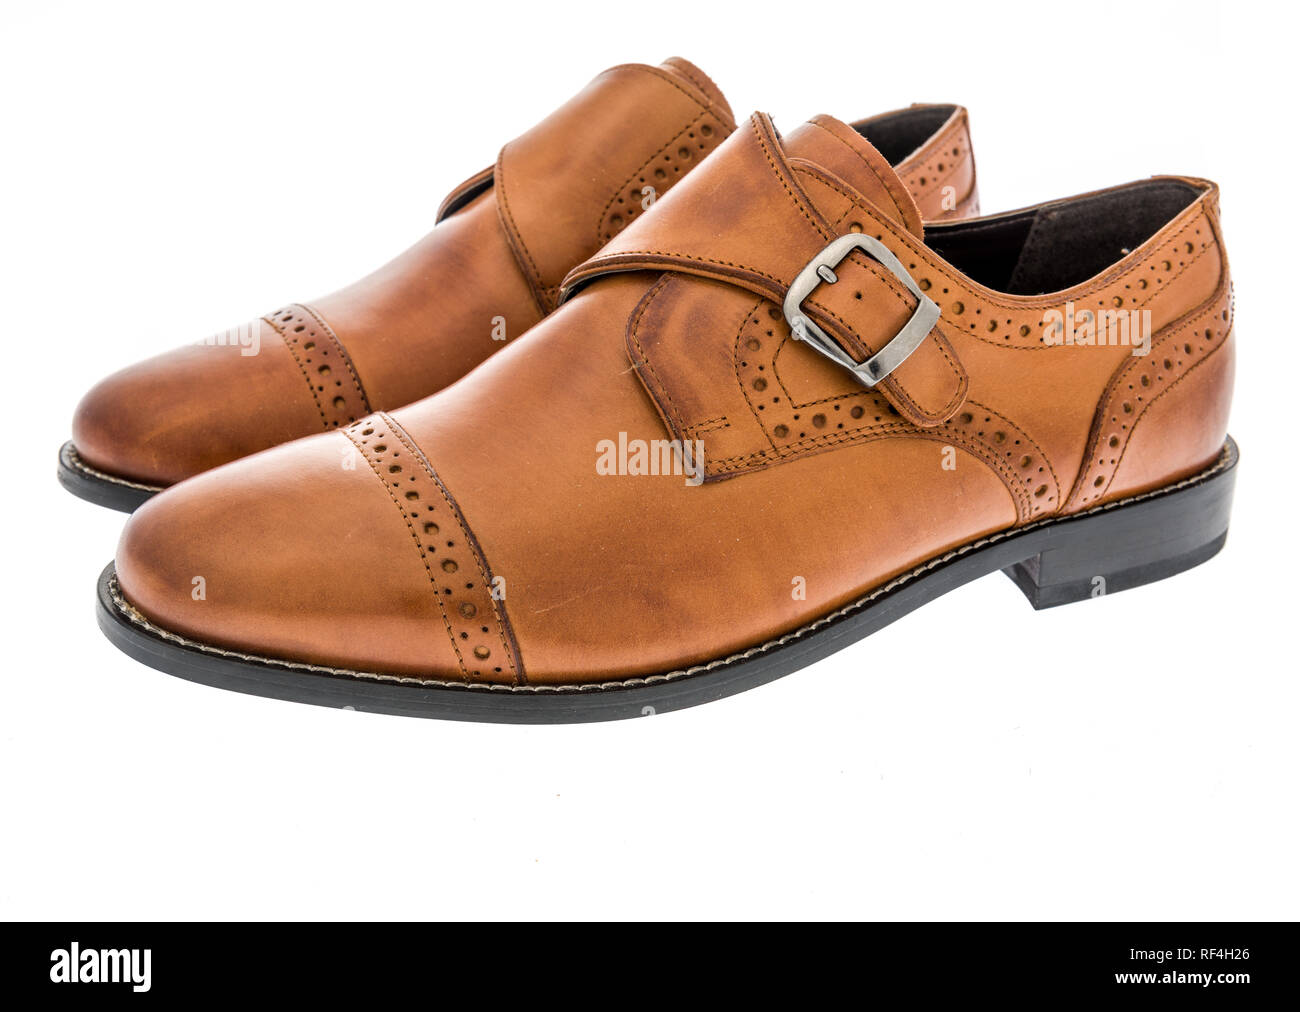 A pair of Monk single strap cap toe dress shoes on an isolated background Stock Photo